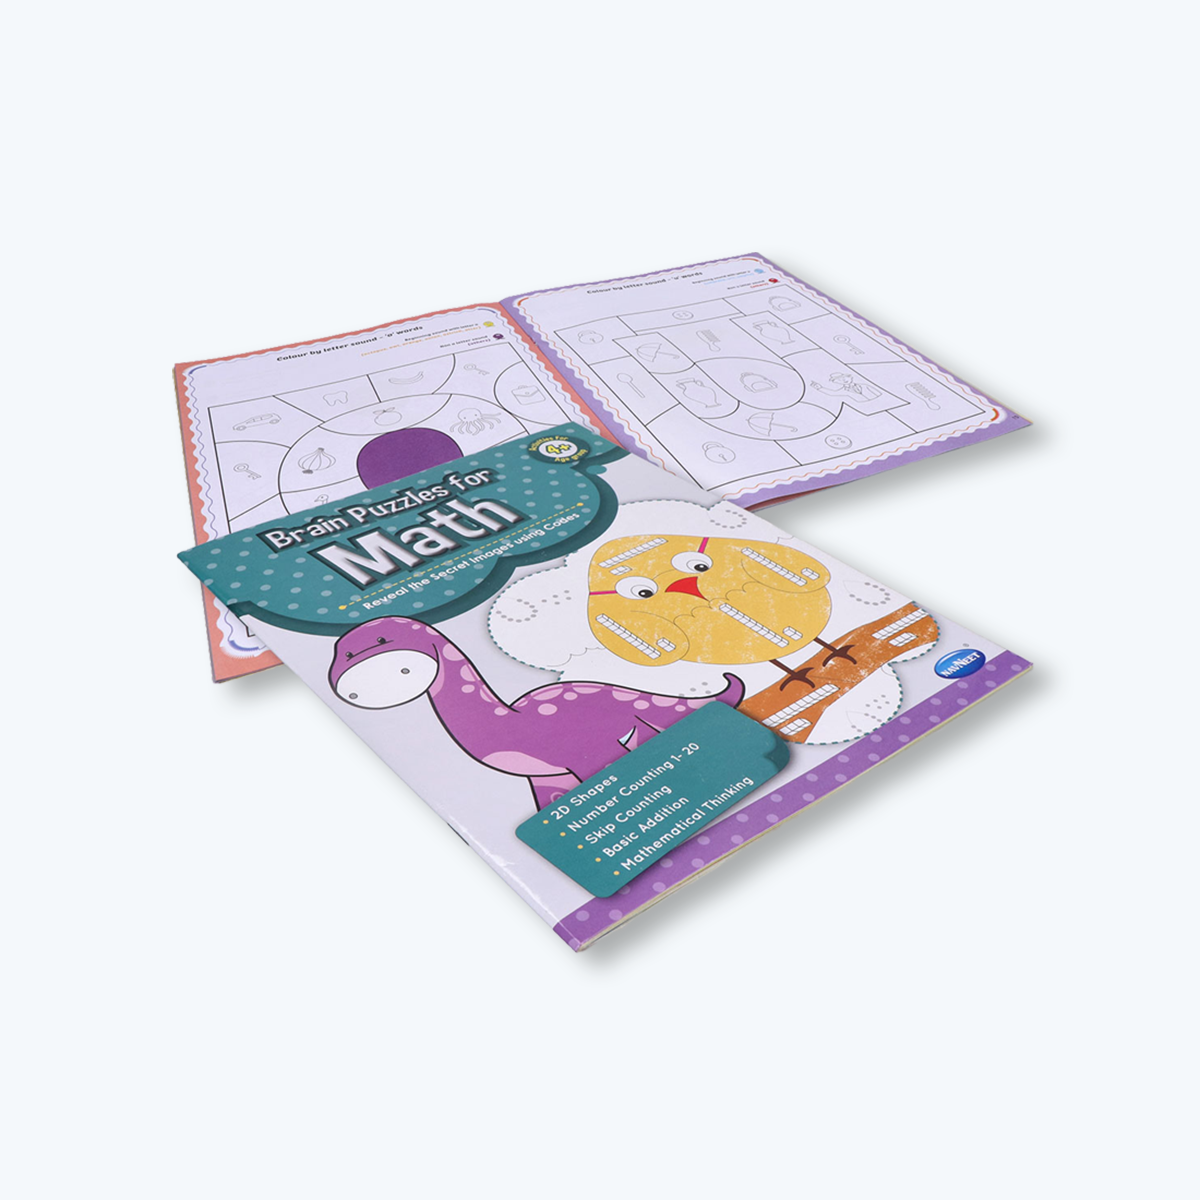 Navneet Brain Puzzle Activity Books - Brain activities for kids - Foundational Literacy & Numeracy books - Age 4+ - Educational - Phonics, Numbers 1-20, Shapes, Addition